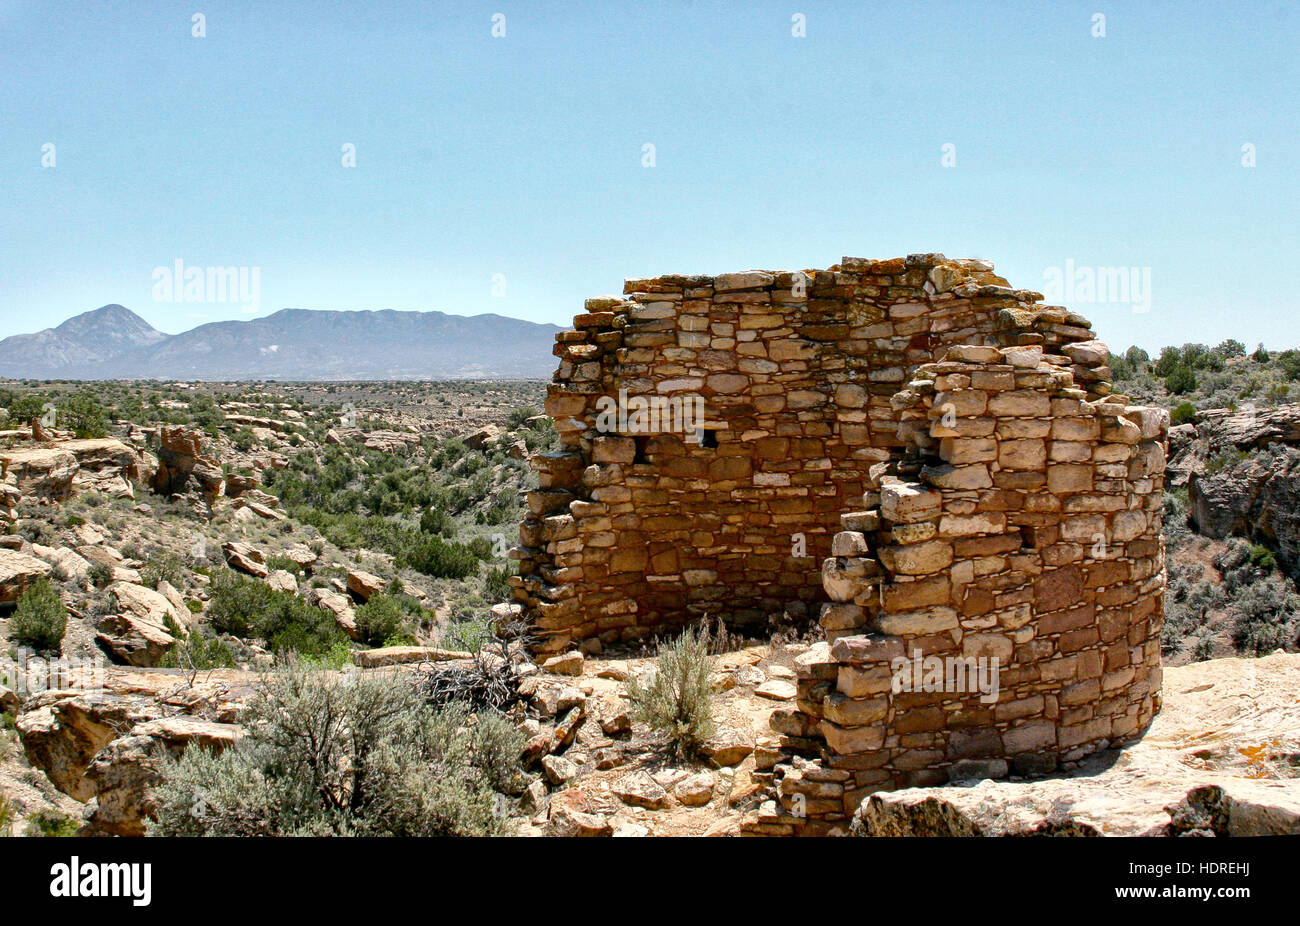 Towers at Hovenweep National Monument in Colorado home to early puebloans although function of structures is unknown. Stock Photo